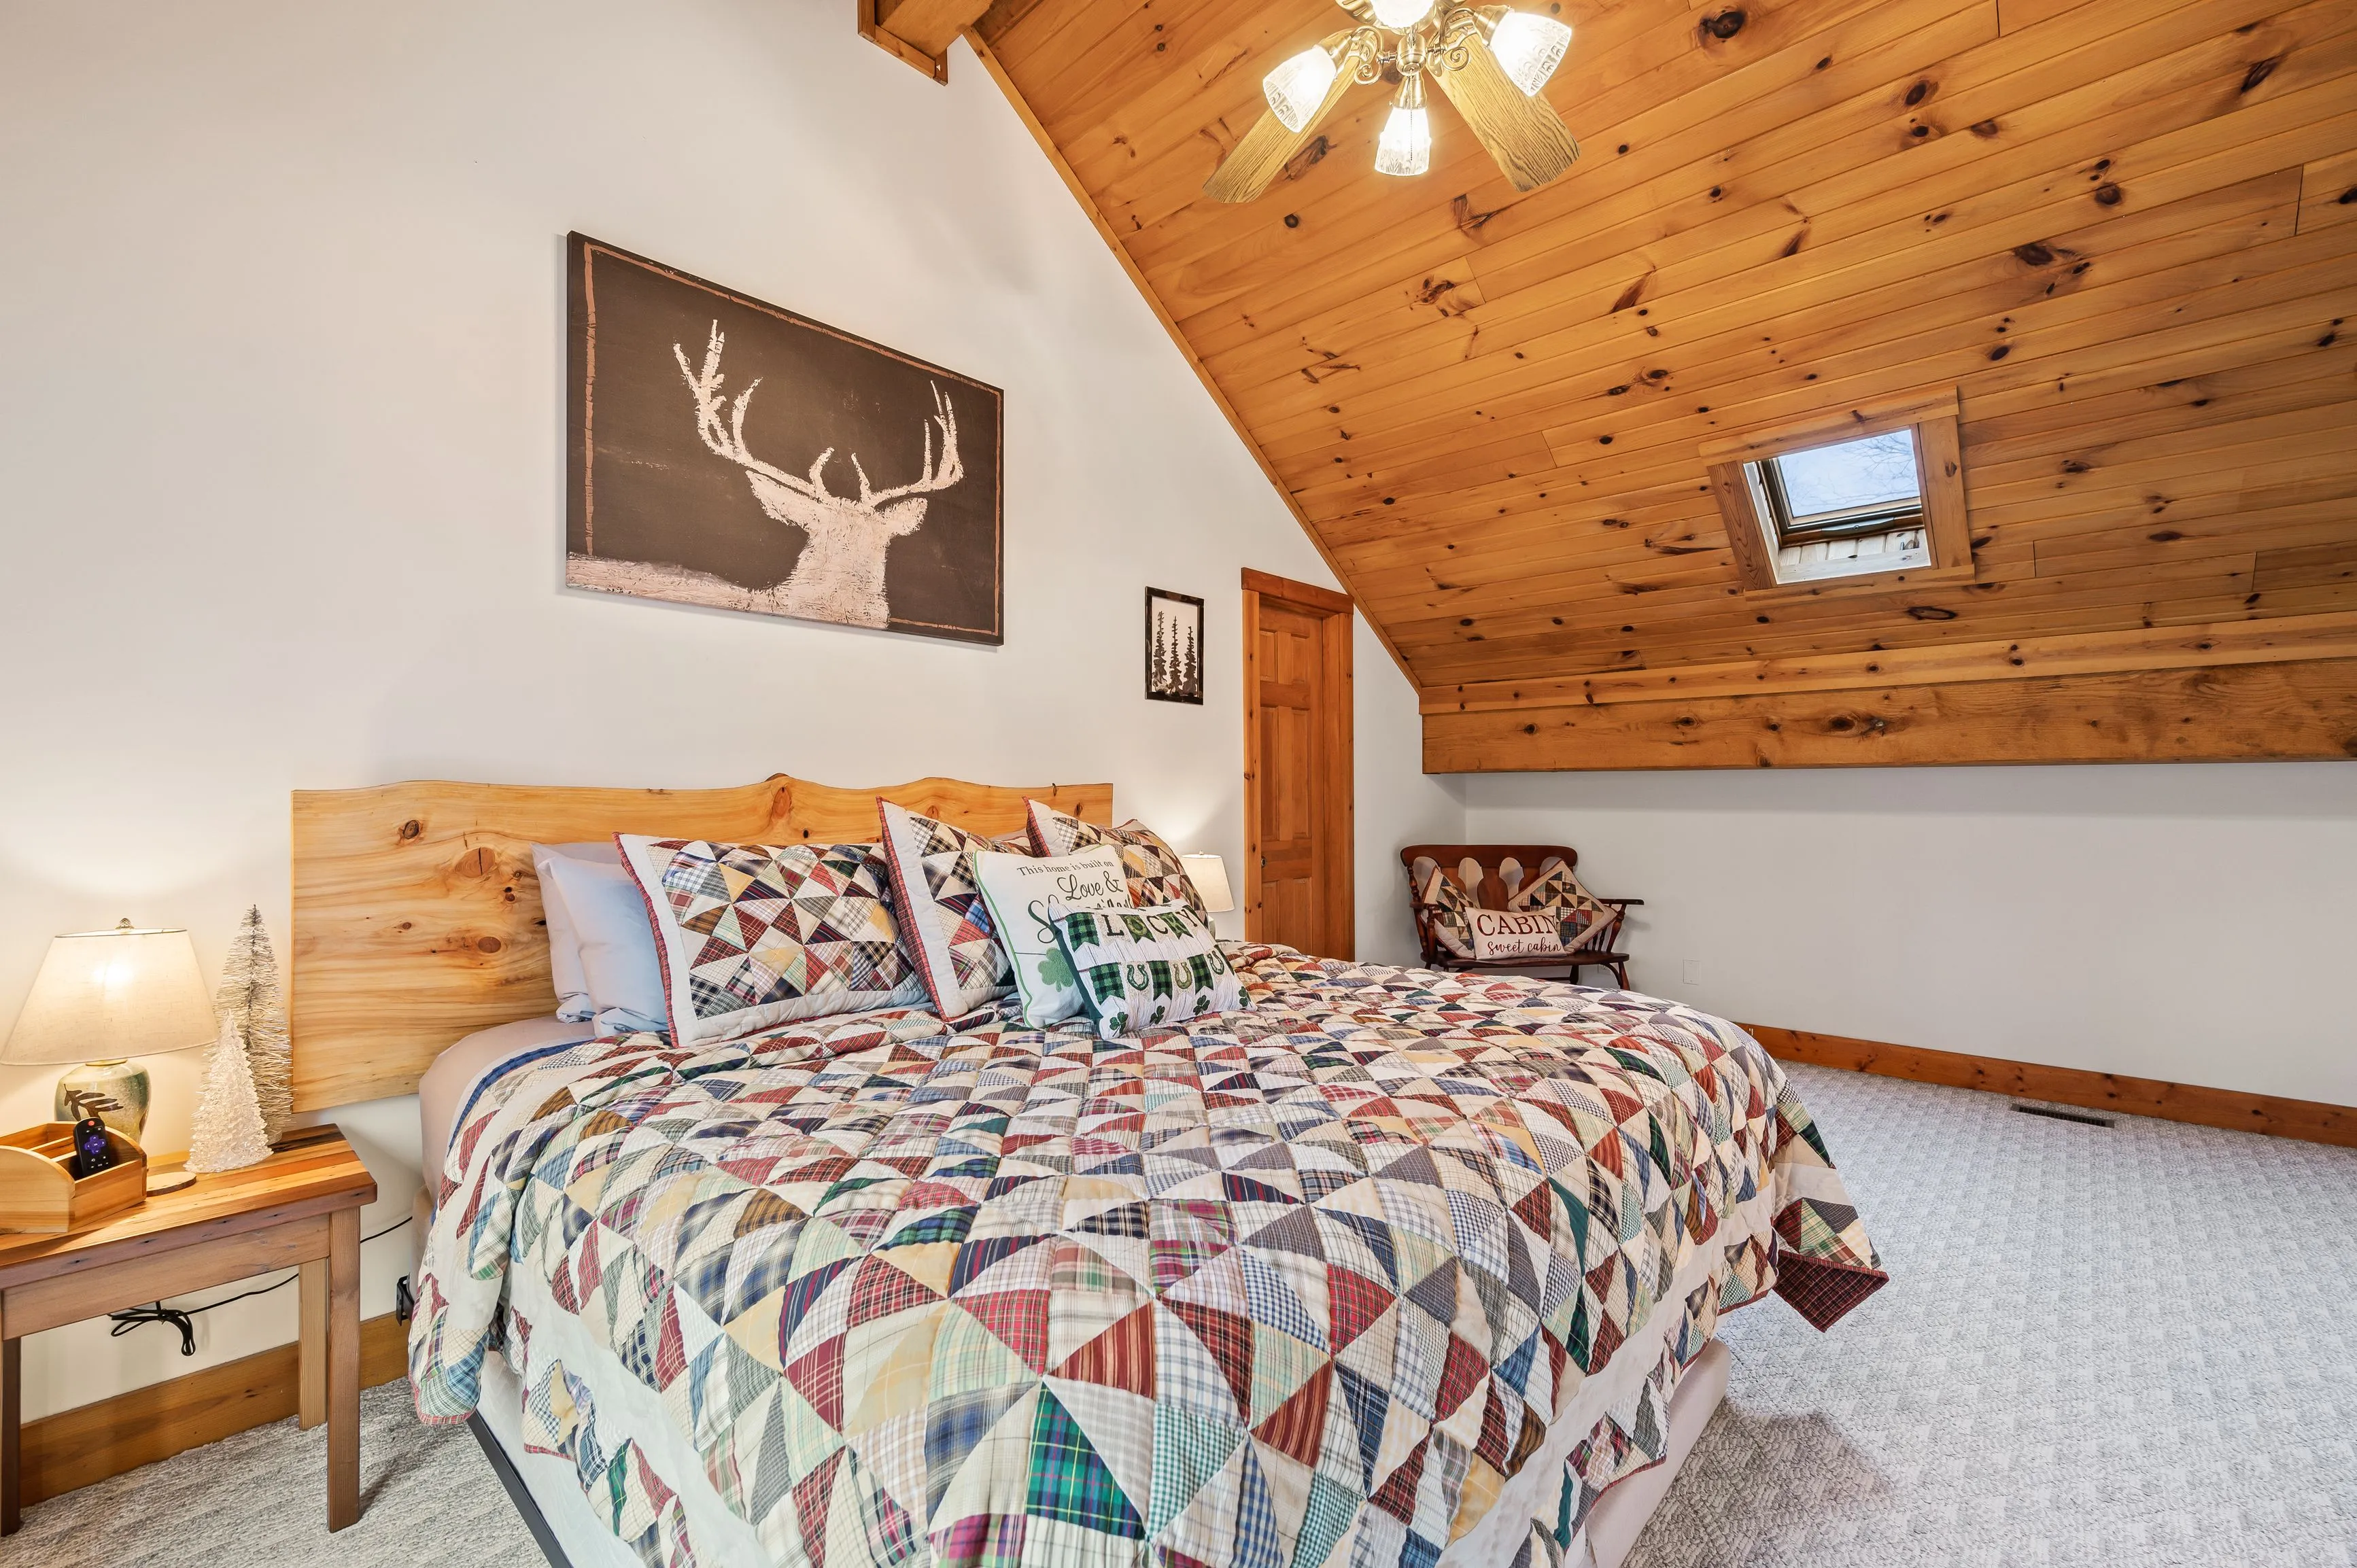 Cozy cabin-style bedroom with wooden ceiling and walls, quilt-covered bed, and rustic decor including a deer head painting.